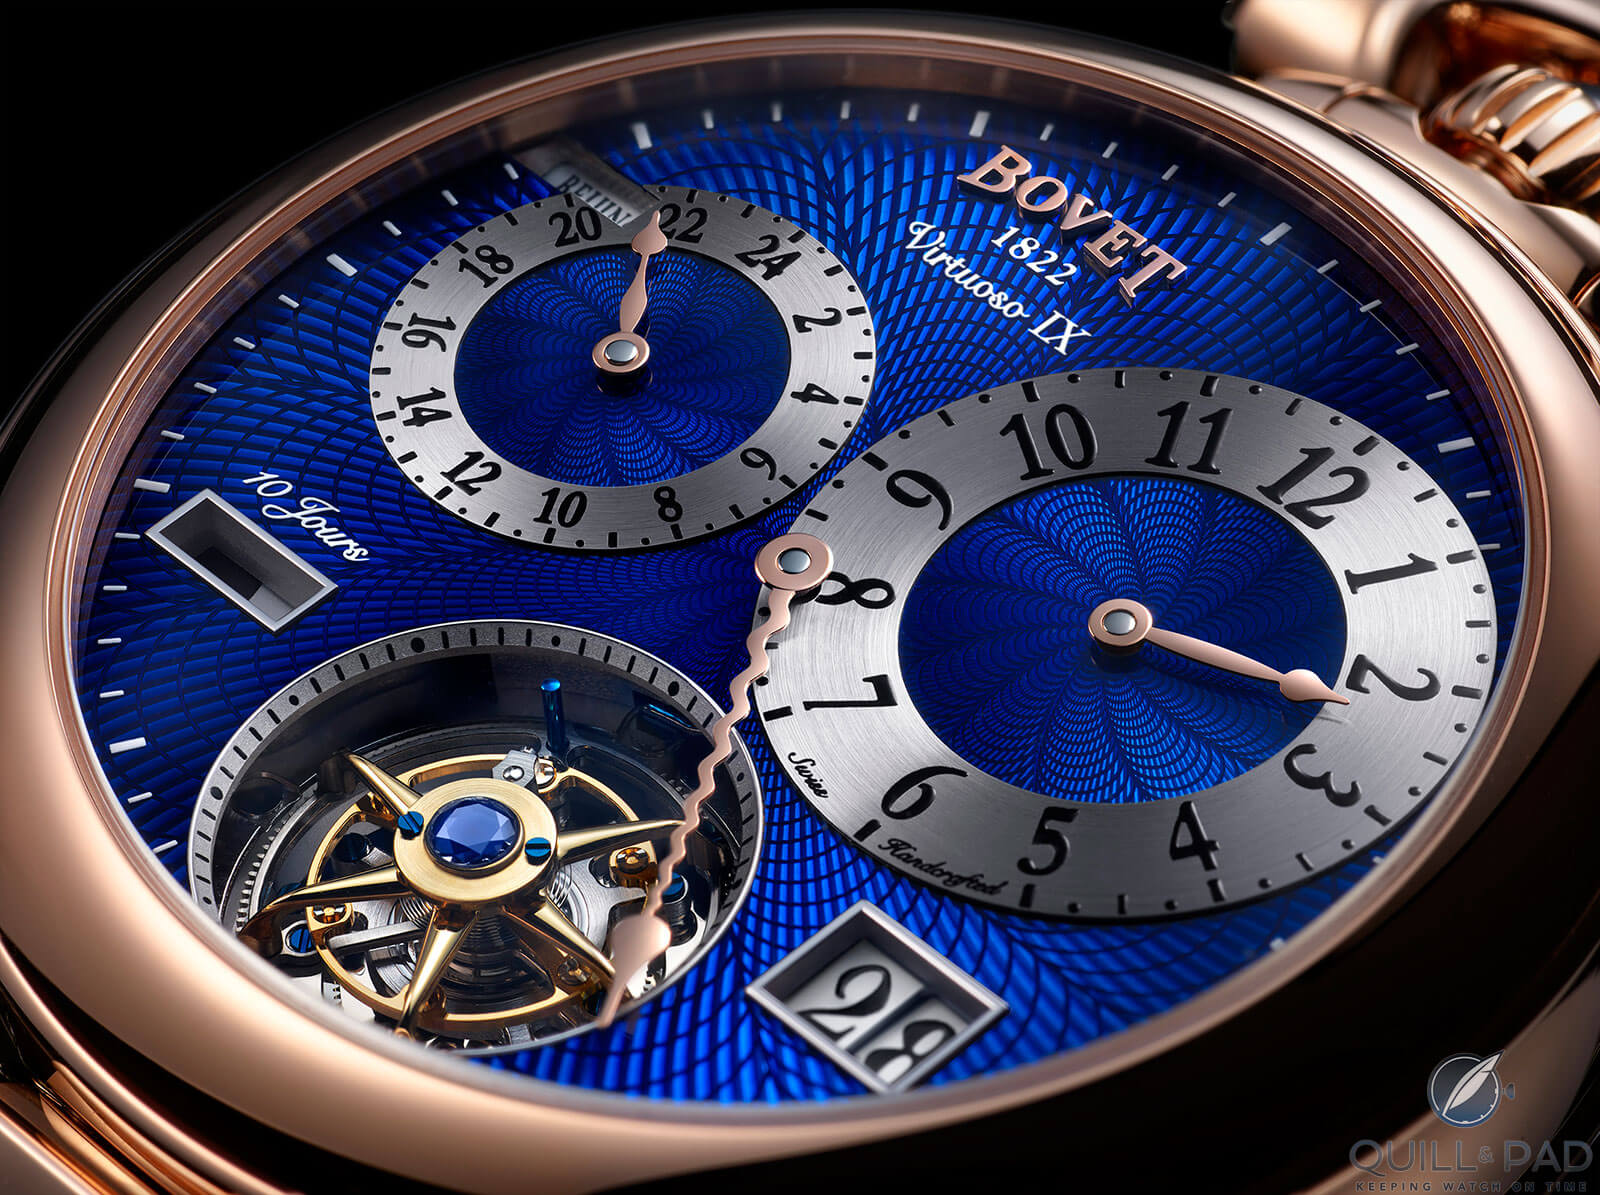 Close look at the blue enamel over guilloche dial of the Bovet Virtuoso IX